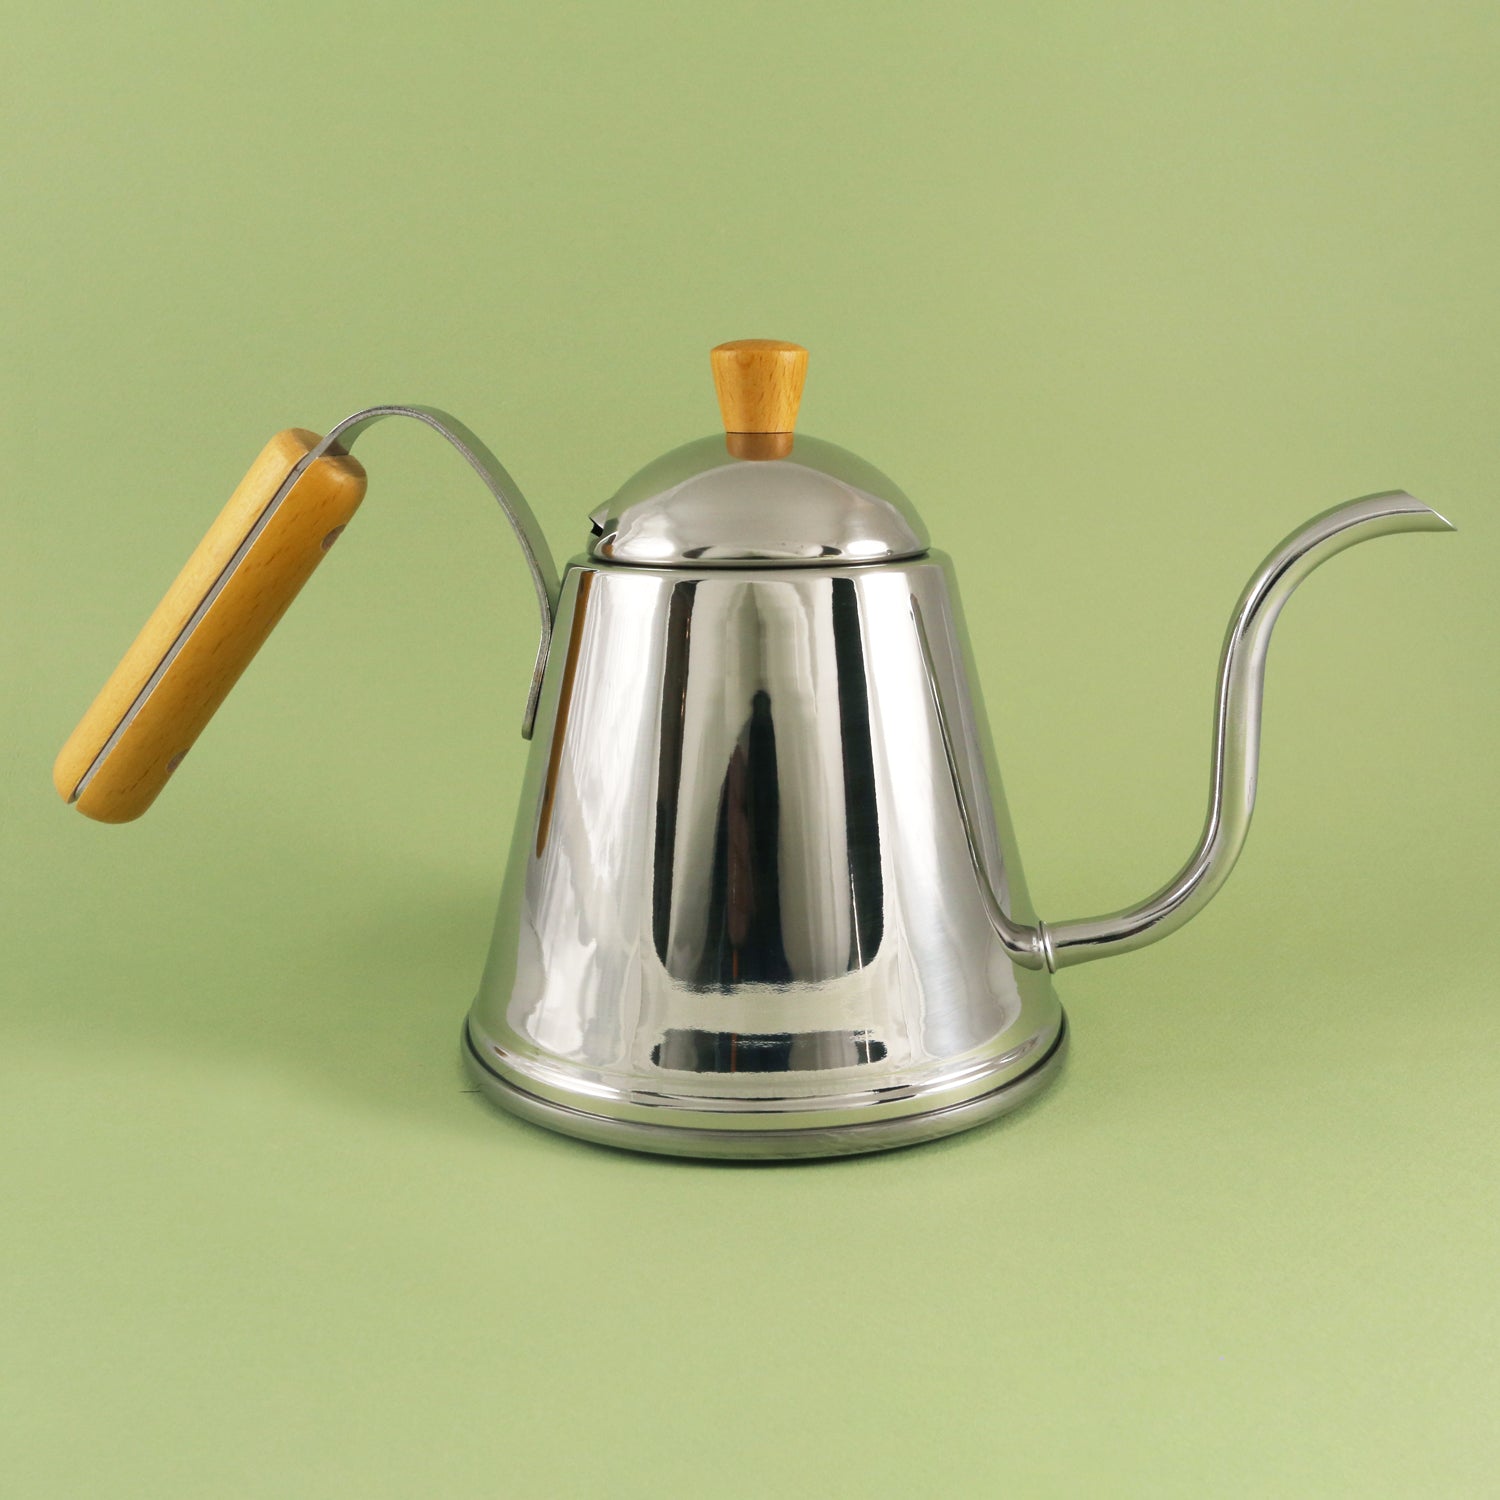 A shiny stainless steel pour over kettle with a wooden handle and a wooden knob on the lid, set against a solid light green background from Tandem Coffee Roasters.